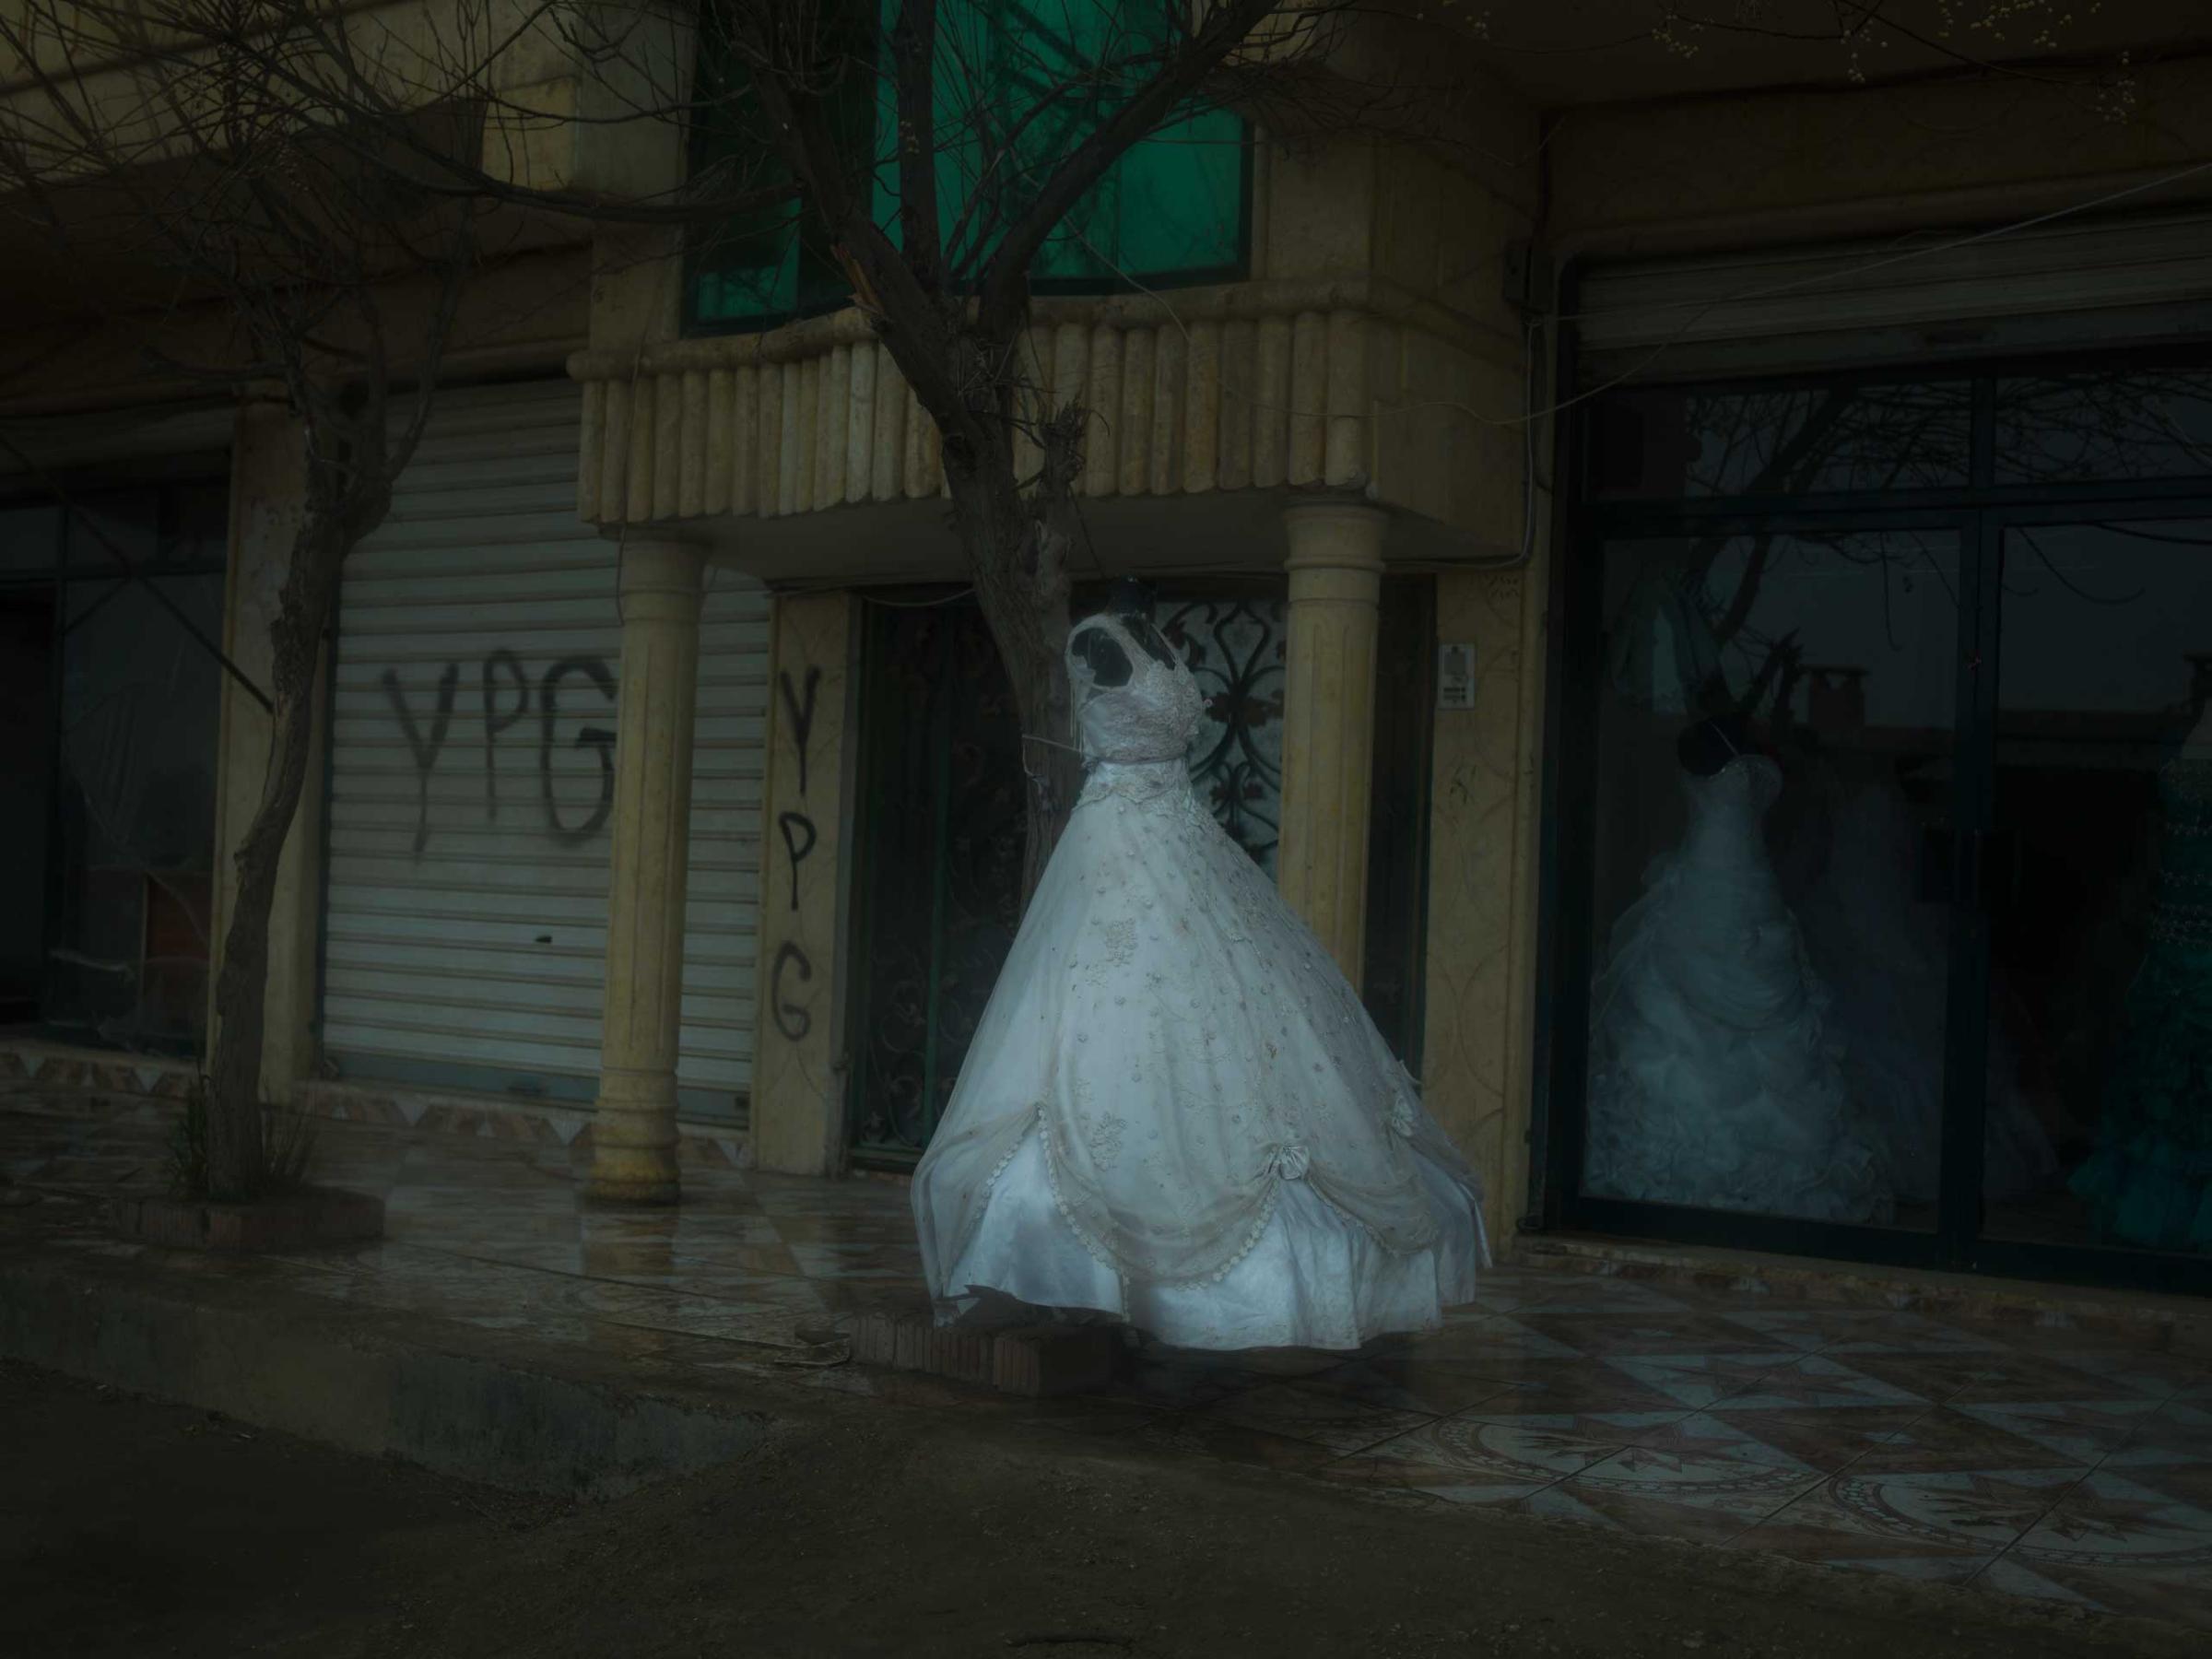 A wedding dress outside a bridal shop in a town near Qamishlou, Syria. YPG graffiti can be seen on the walls of adjacent buildings. YPJ and YPG members are neither allowed to marry, nor can they have sexual relationships, according the their ideology. Newsha Tavakolian for TIME